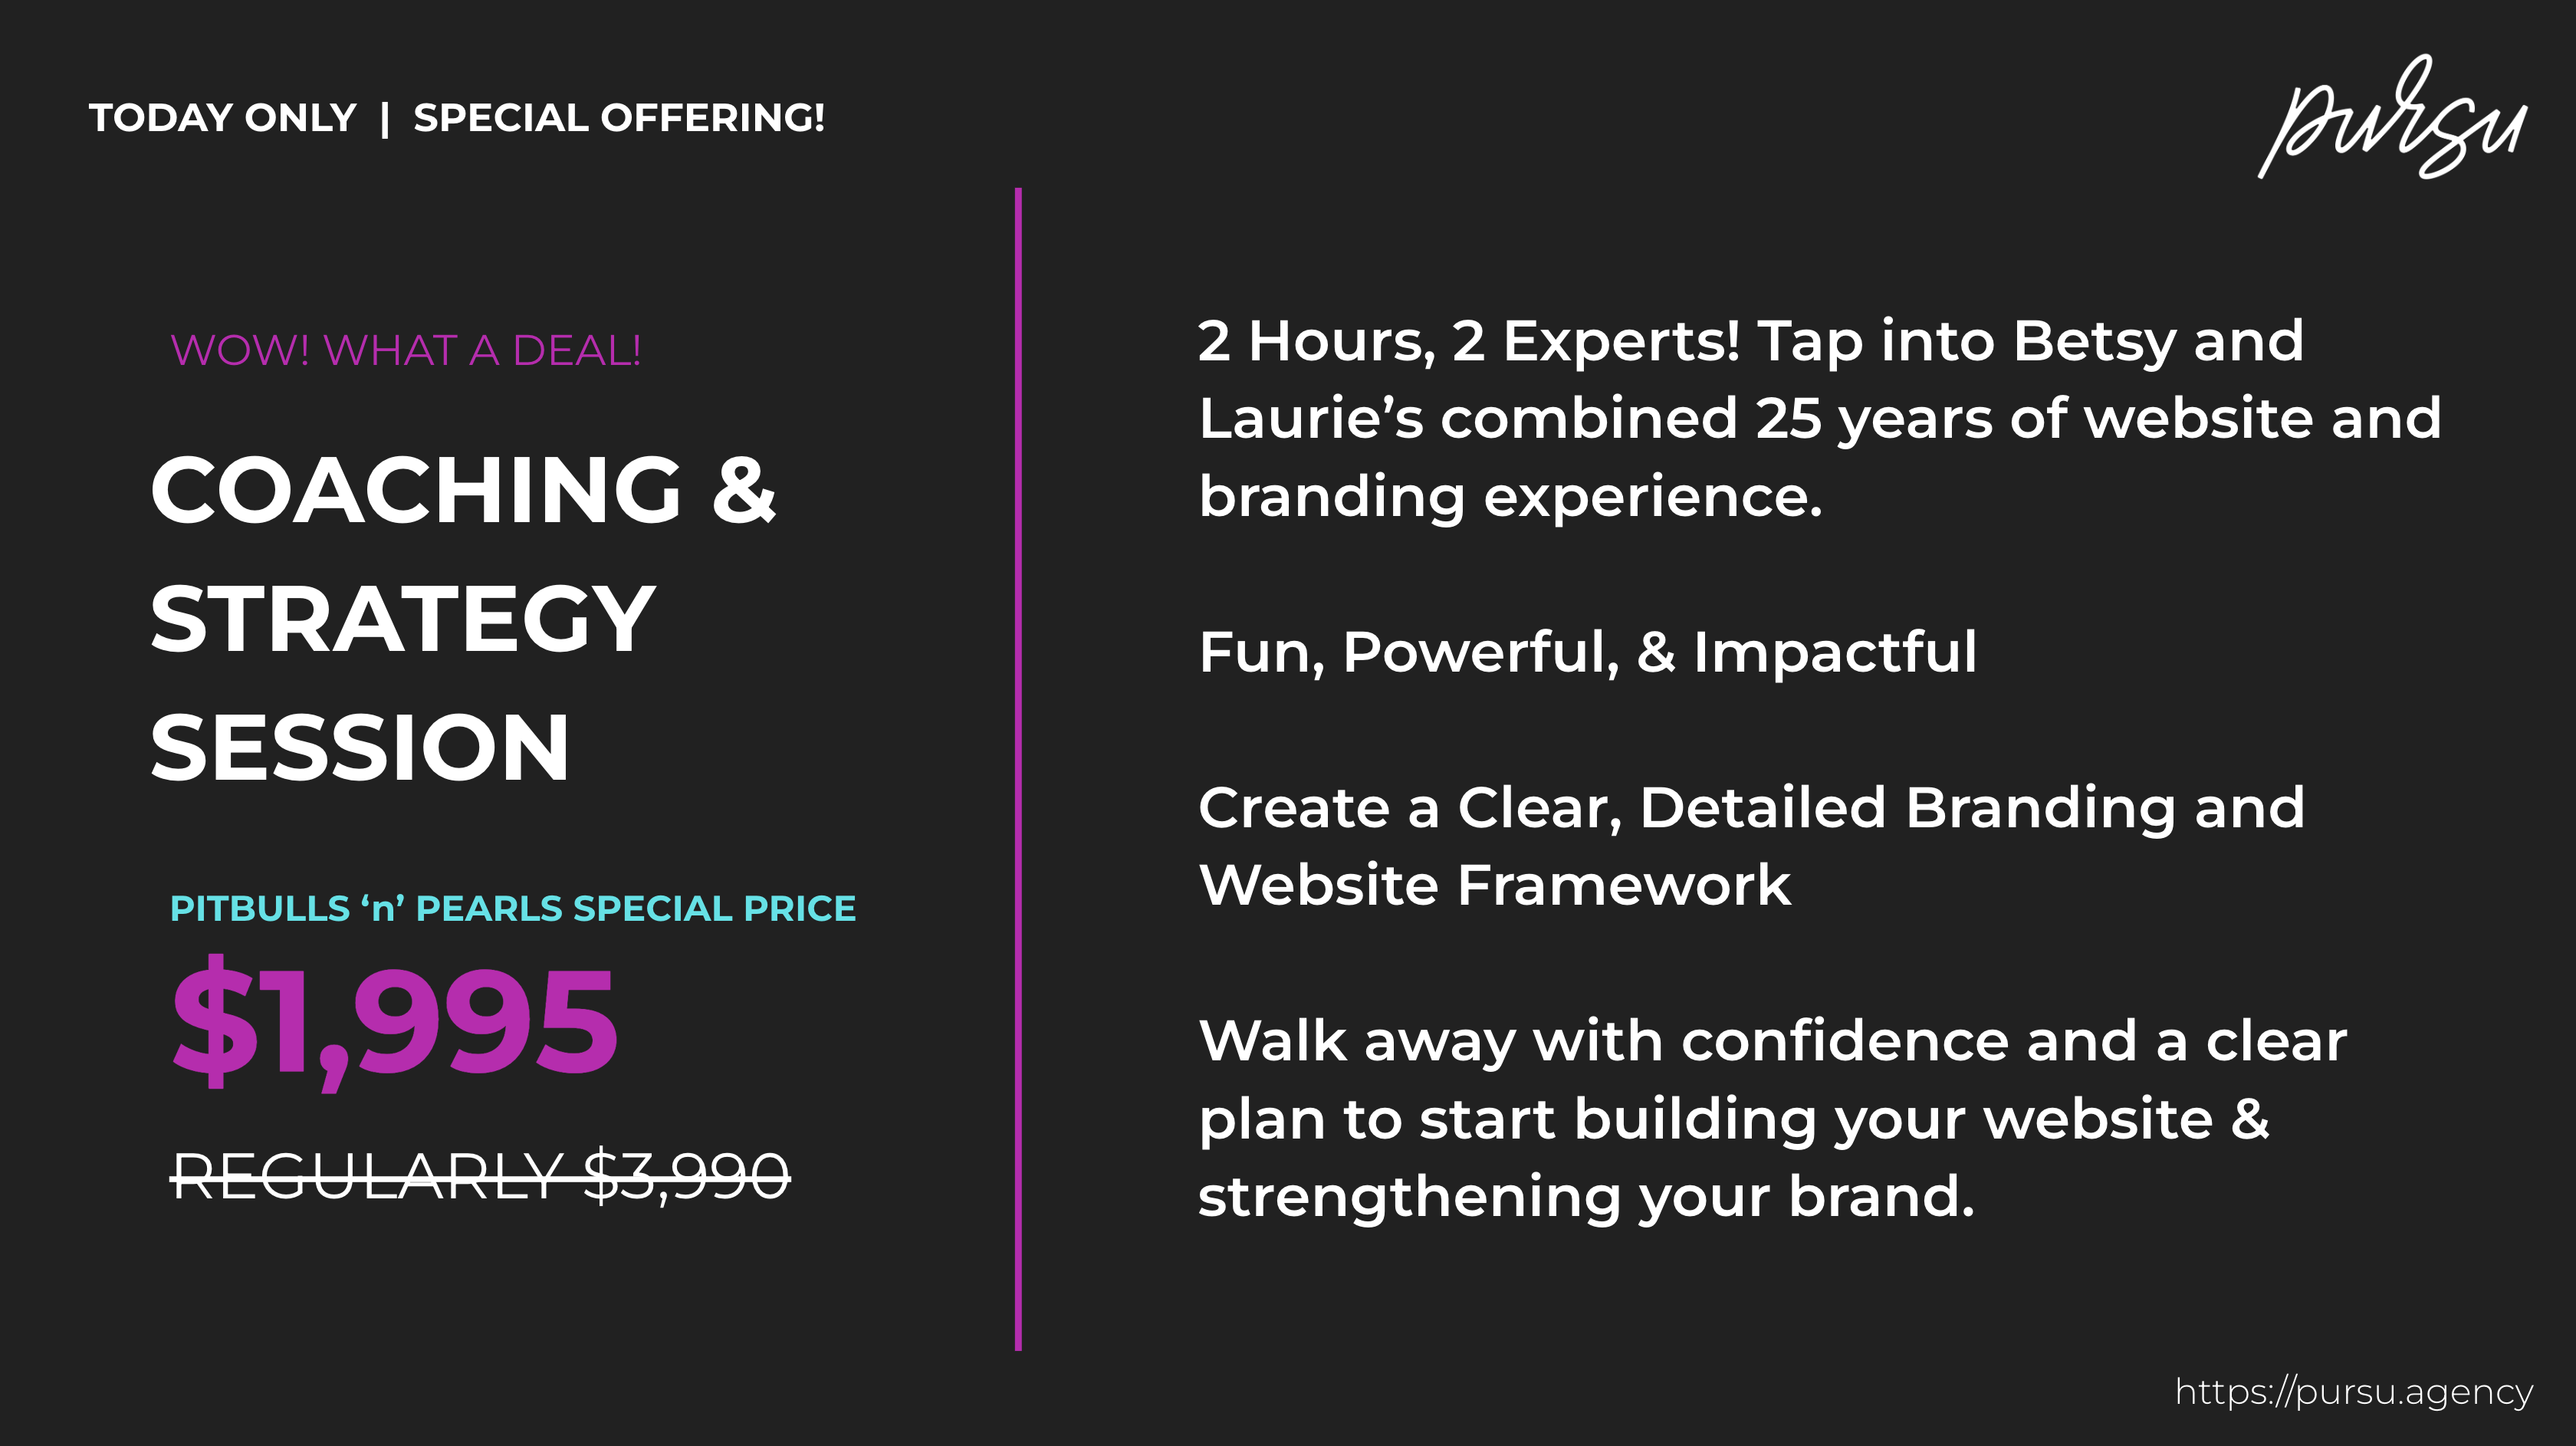 Stuck or not sure how to build the business of your dreams? Let Laurie and Betsy guide you with an in-depth coaching and business strategy session focused on website development, brand strategy, business growth and more!